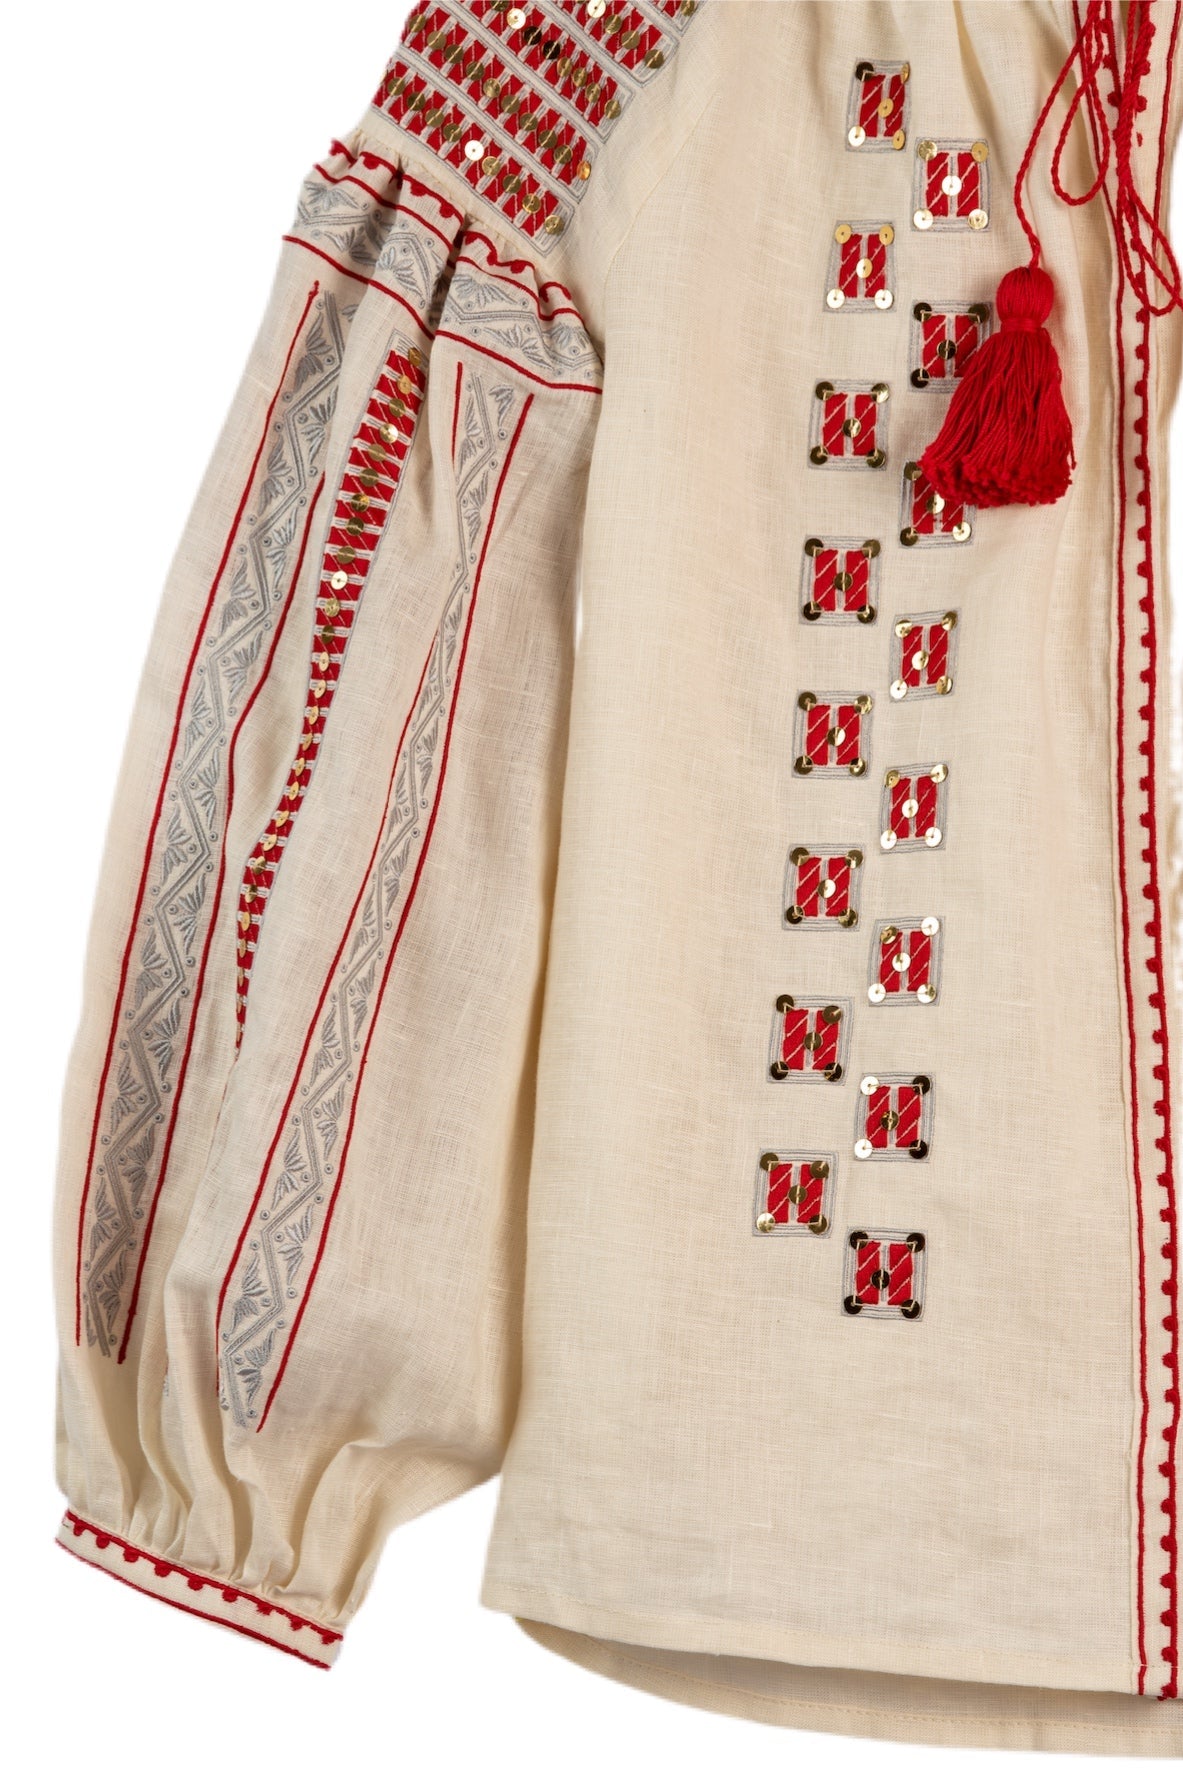 Anishka Embroidered Ukrainian Top - Ivory, Red, Silver